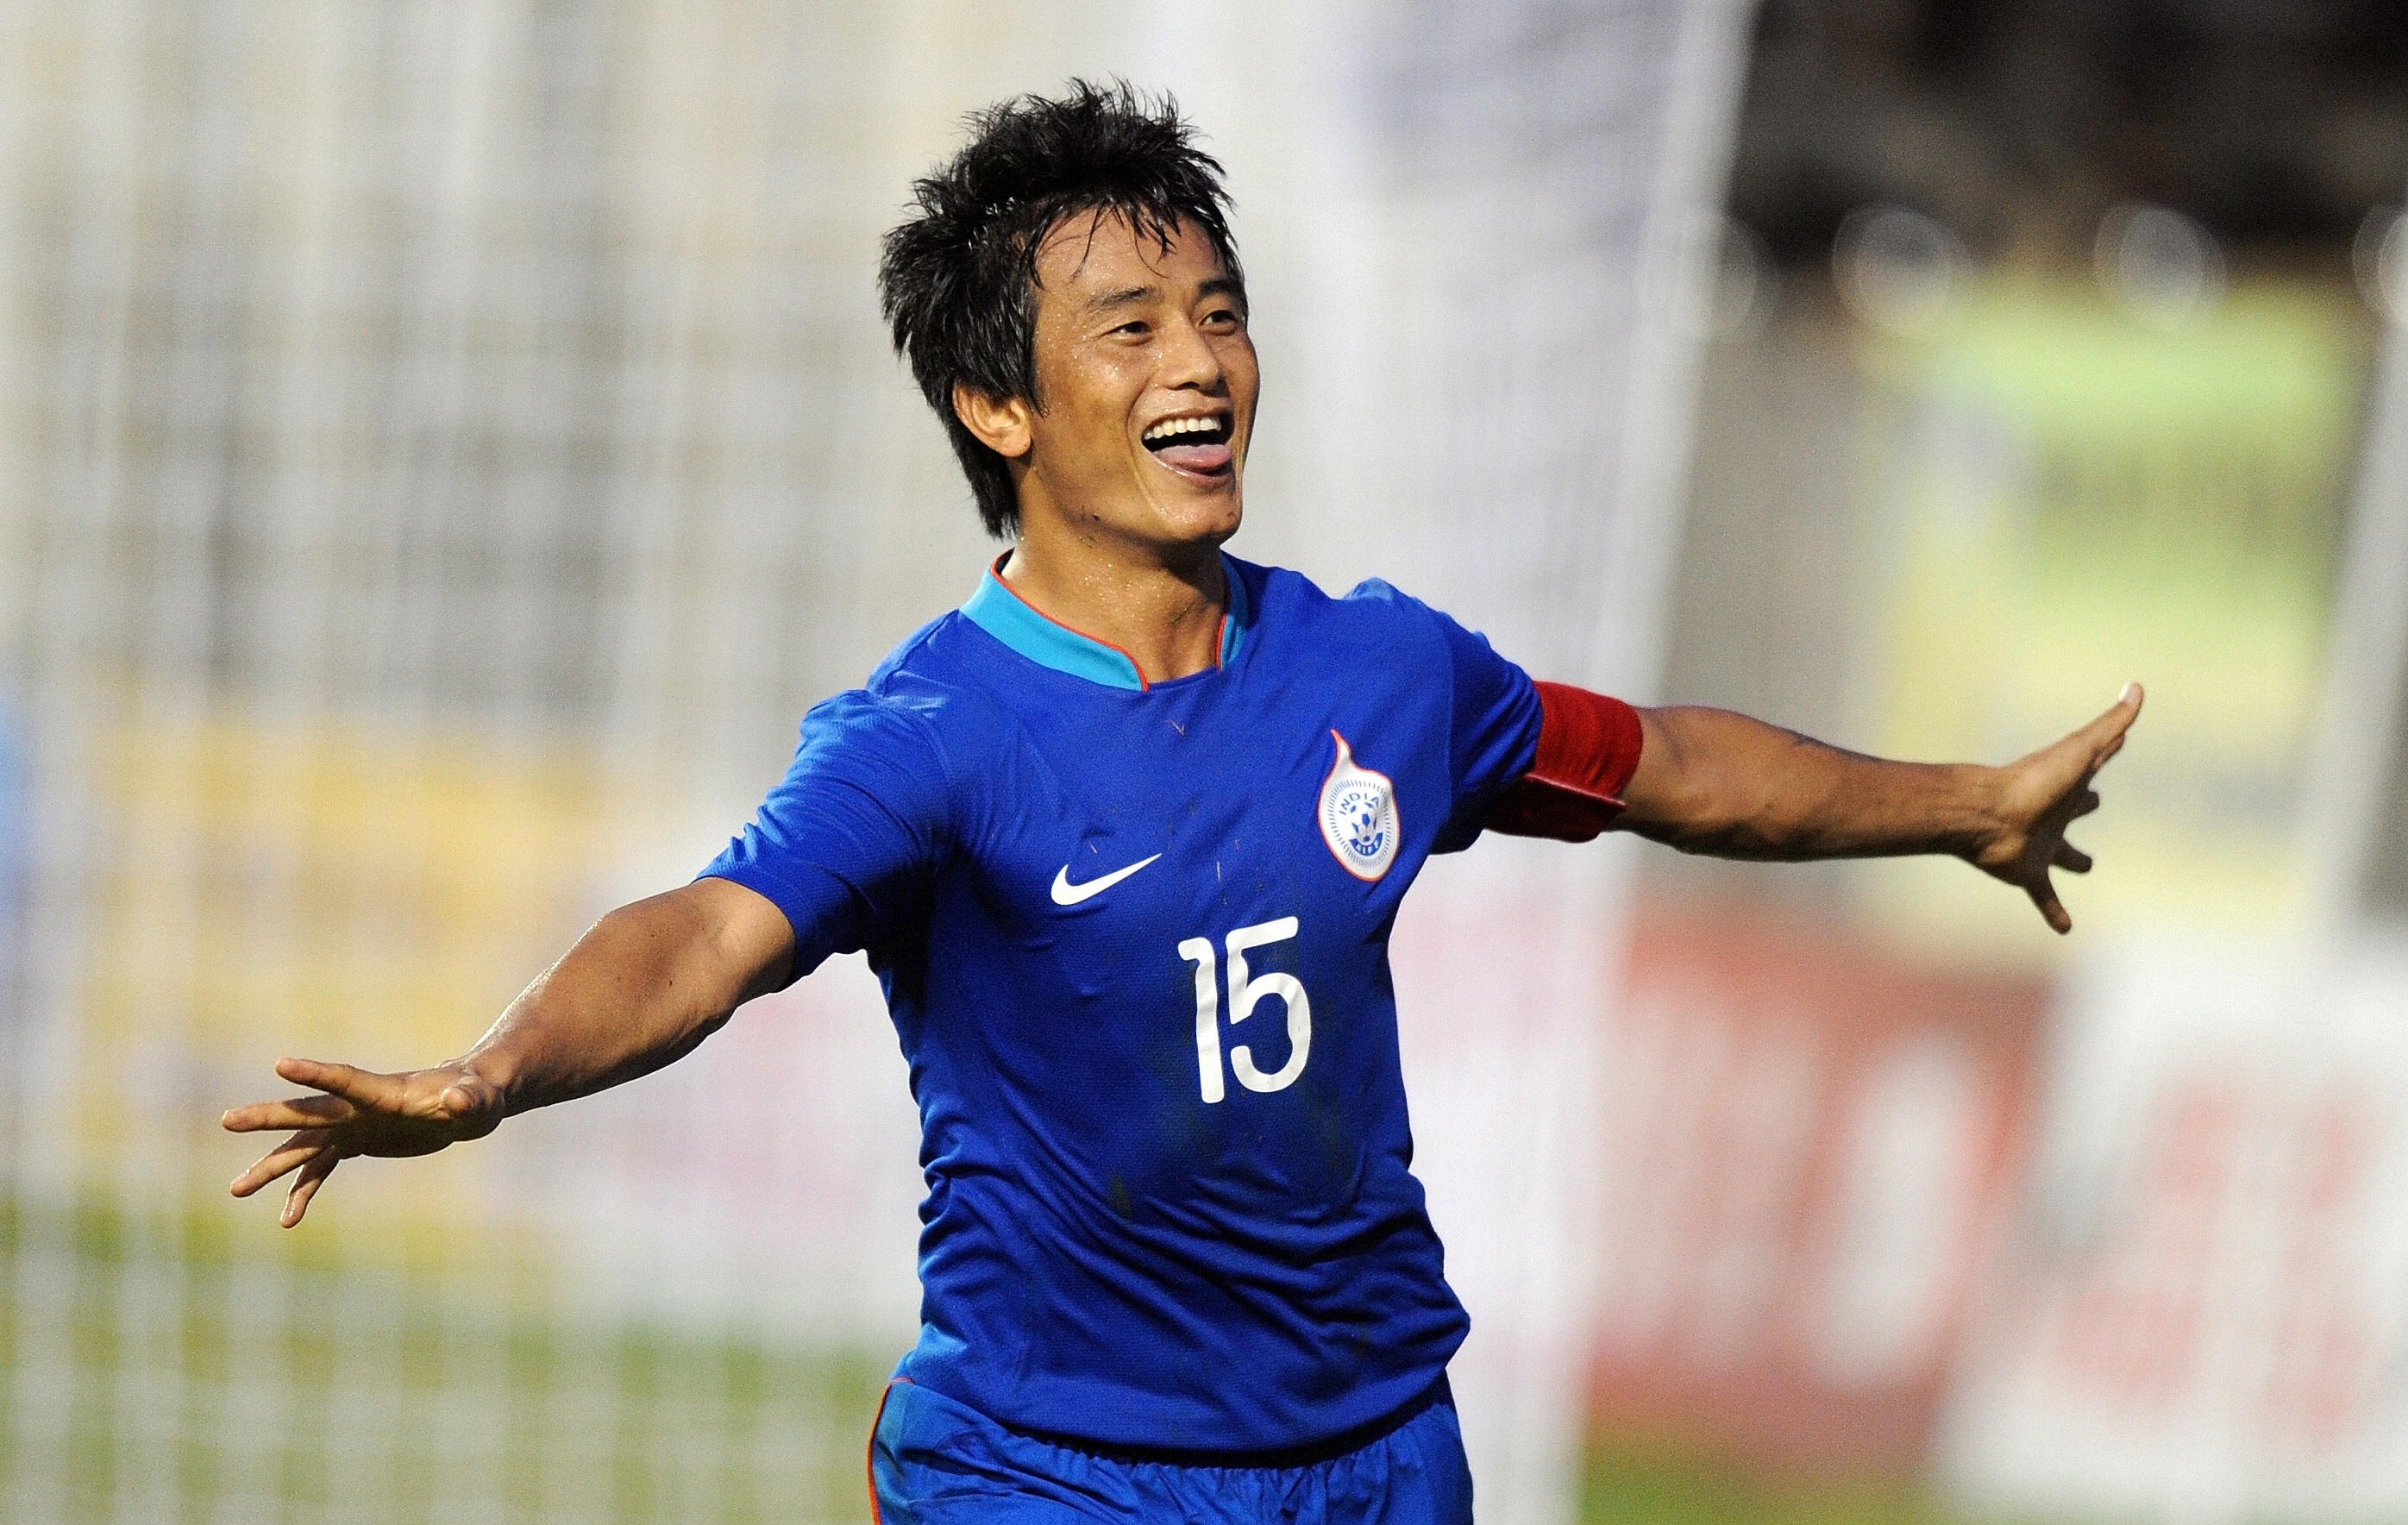 Bhaichung Bhutia - The Man Who Made Us Fall In Love With Indian Football